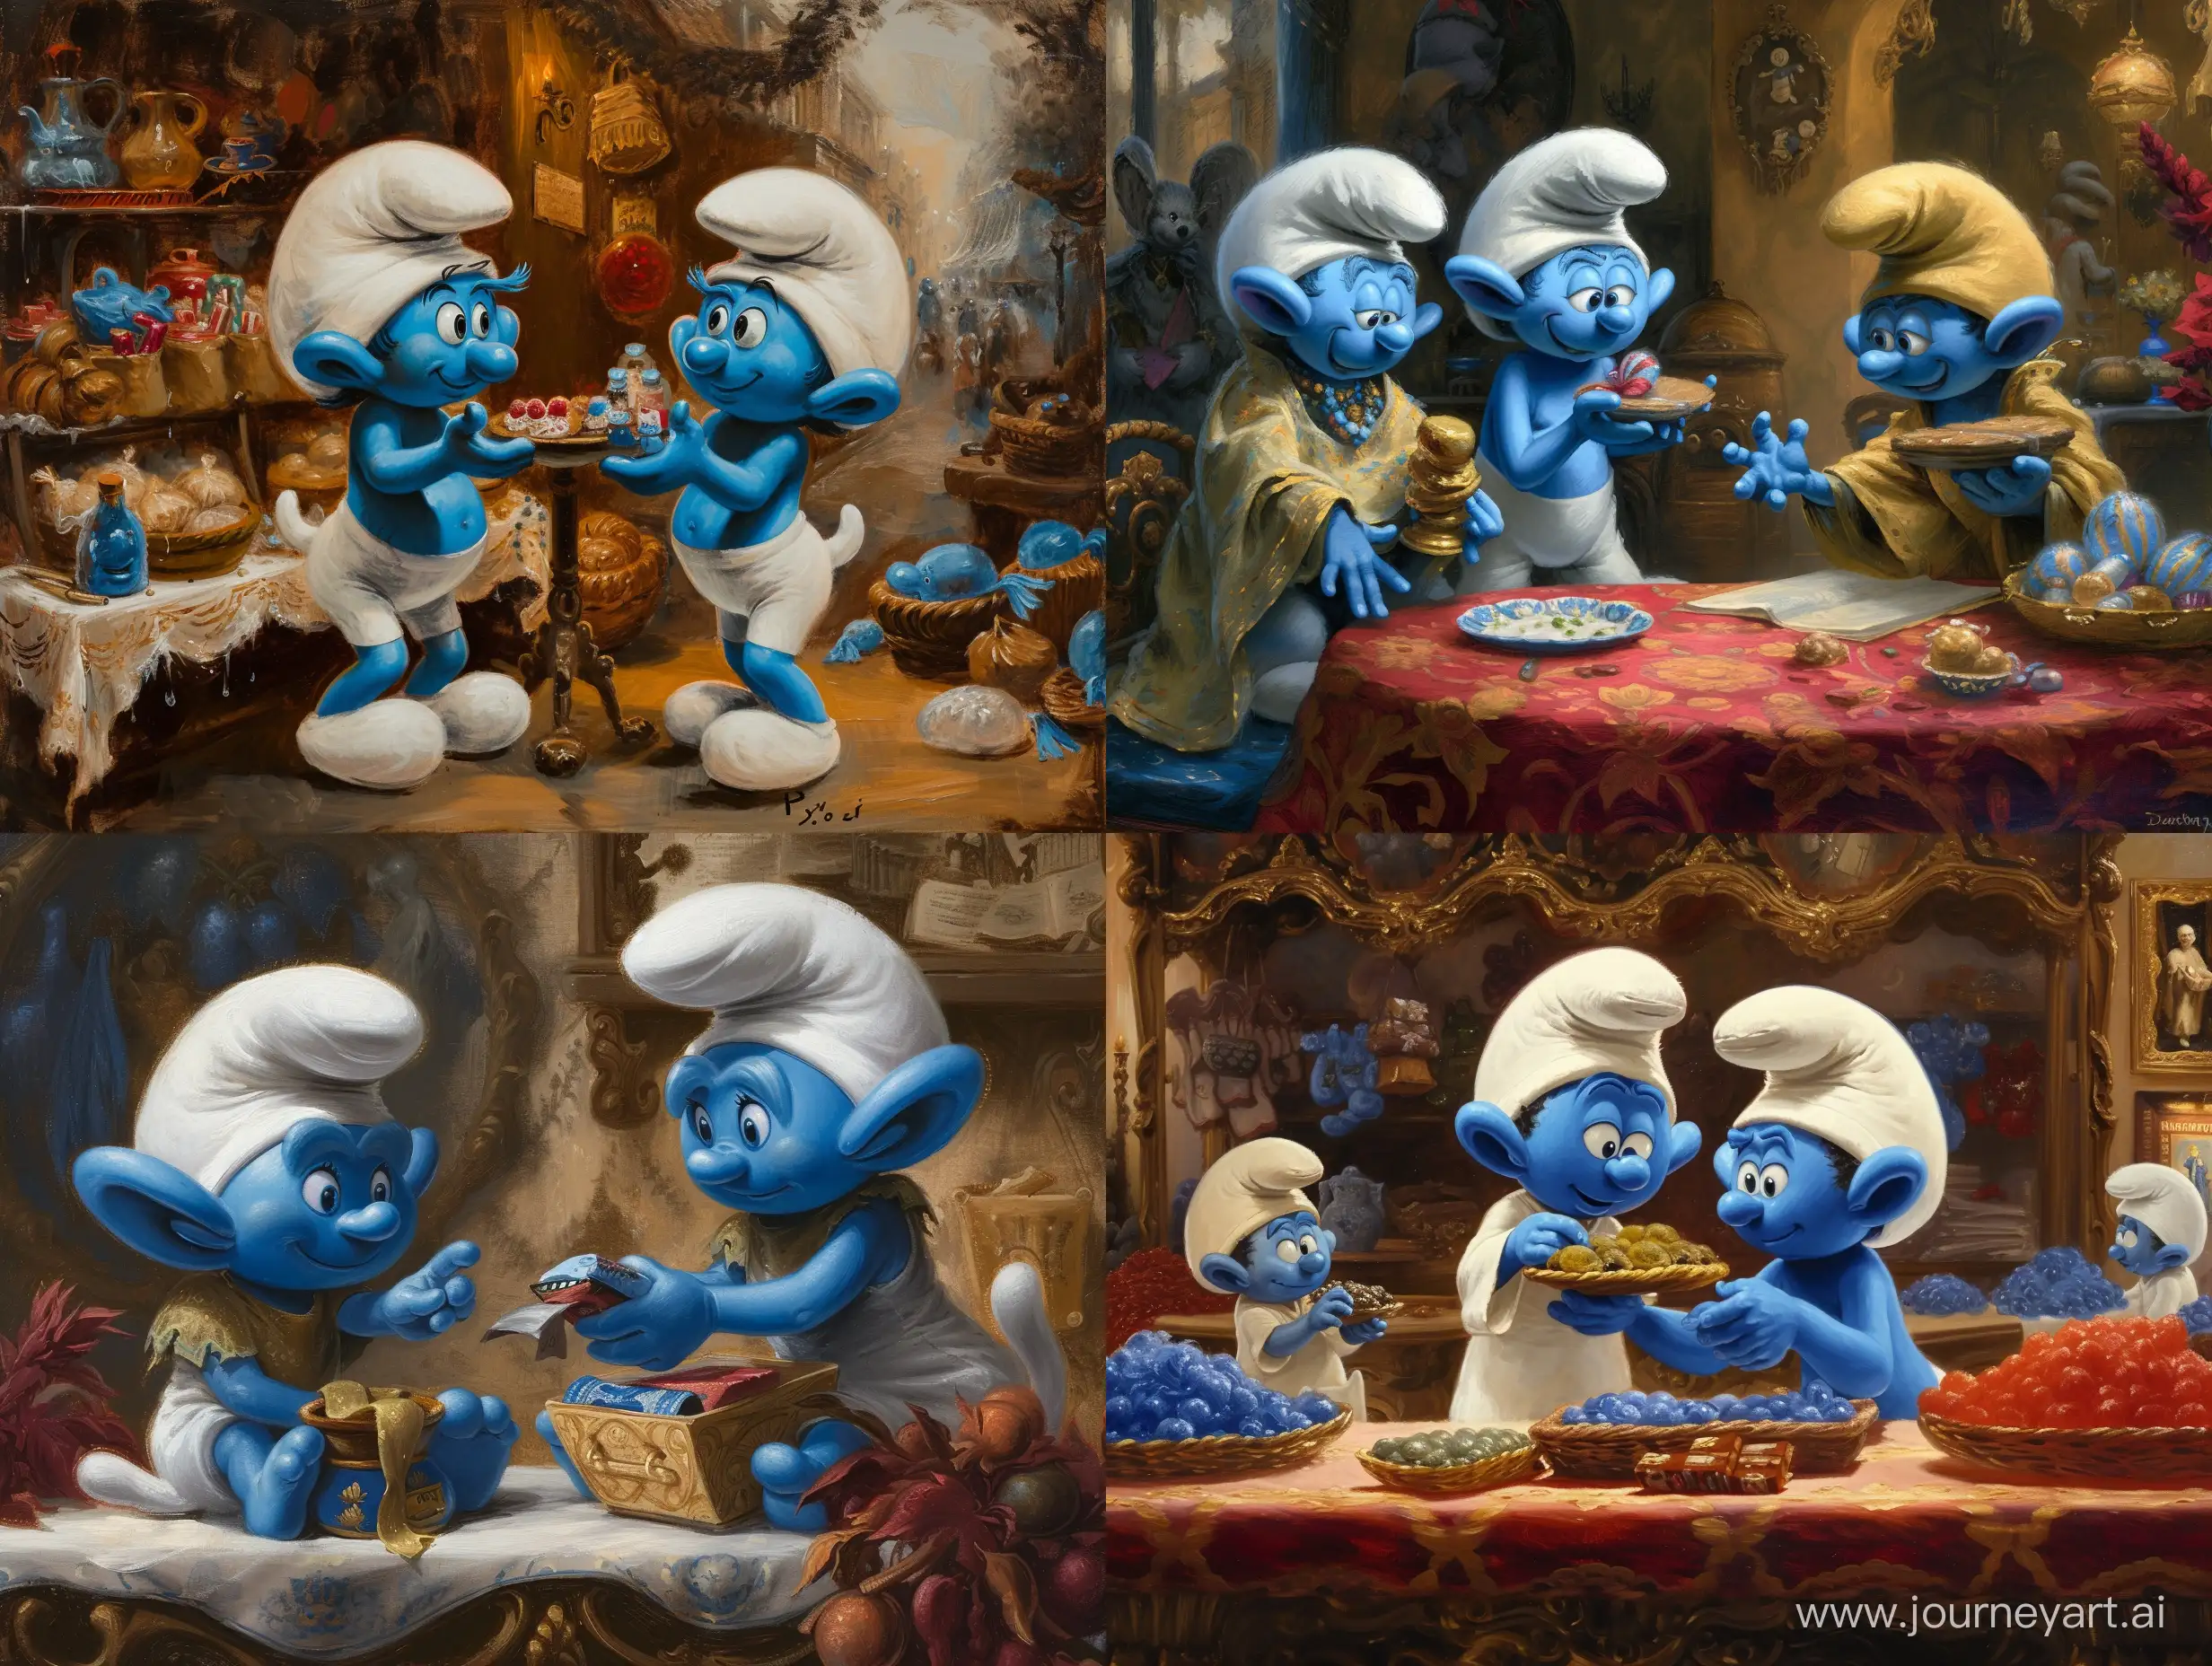 smurfs trading stuff with each other, baroque artstyle, detailed painting.